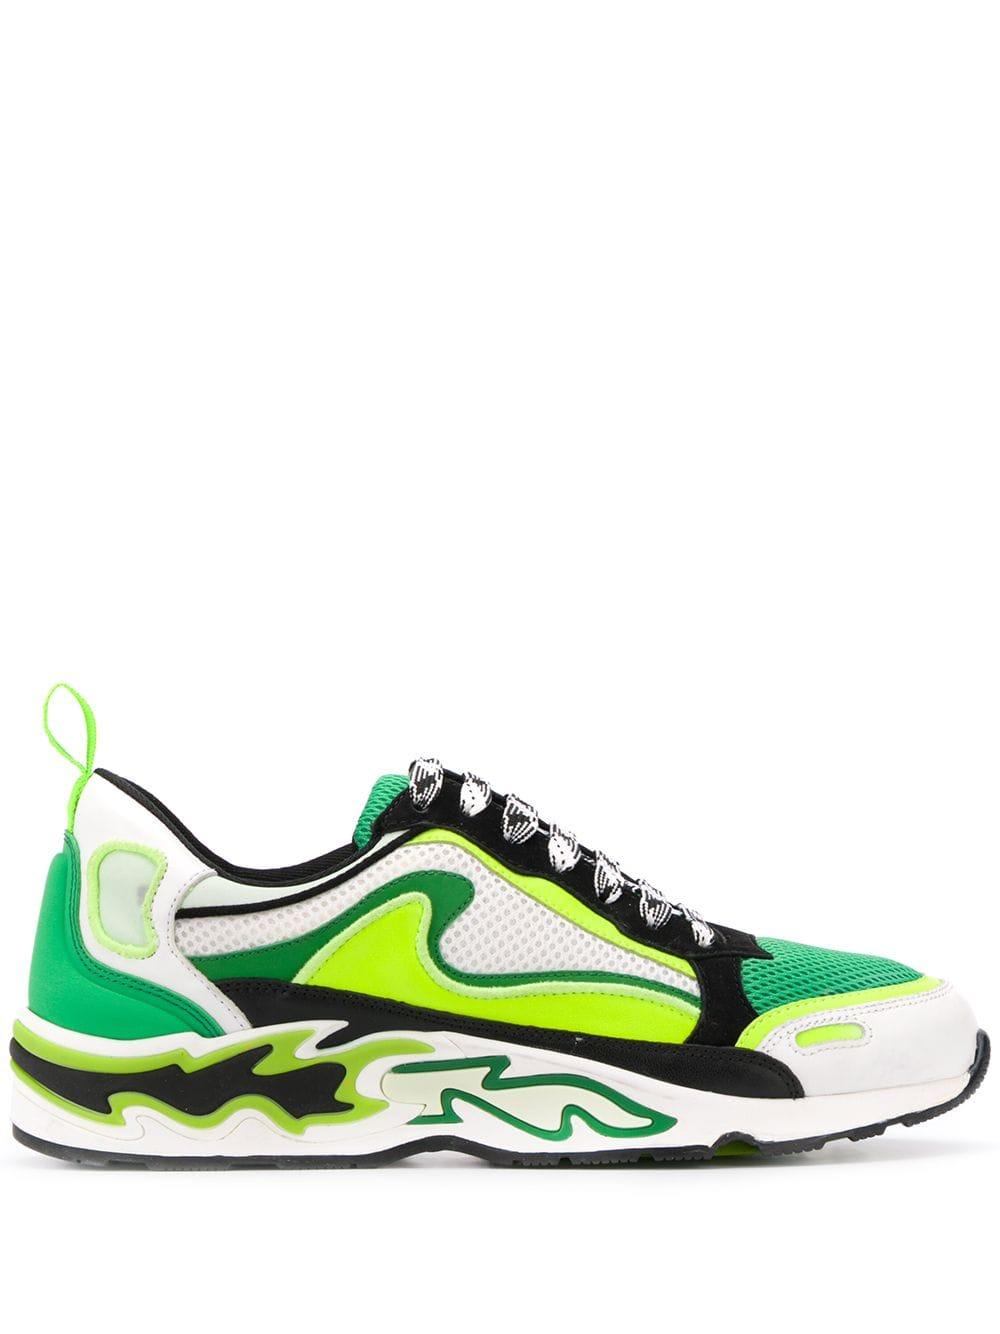 Sandro Flame Sneakers in Green - Lyst